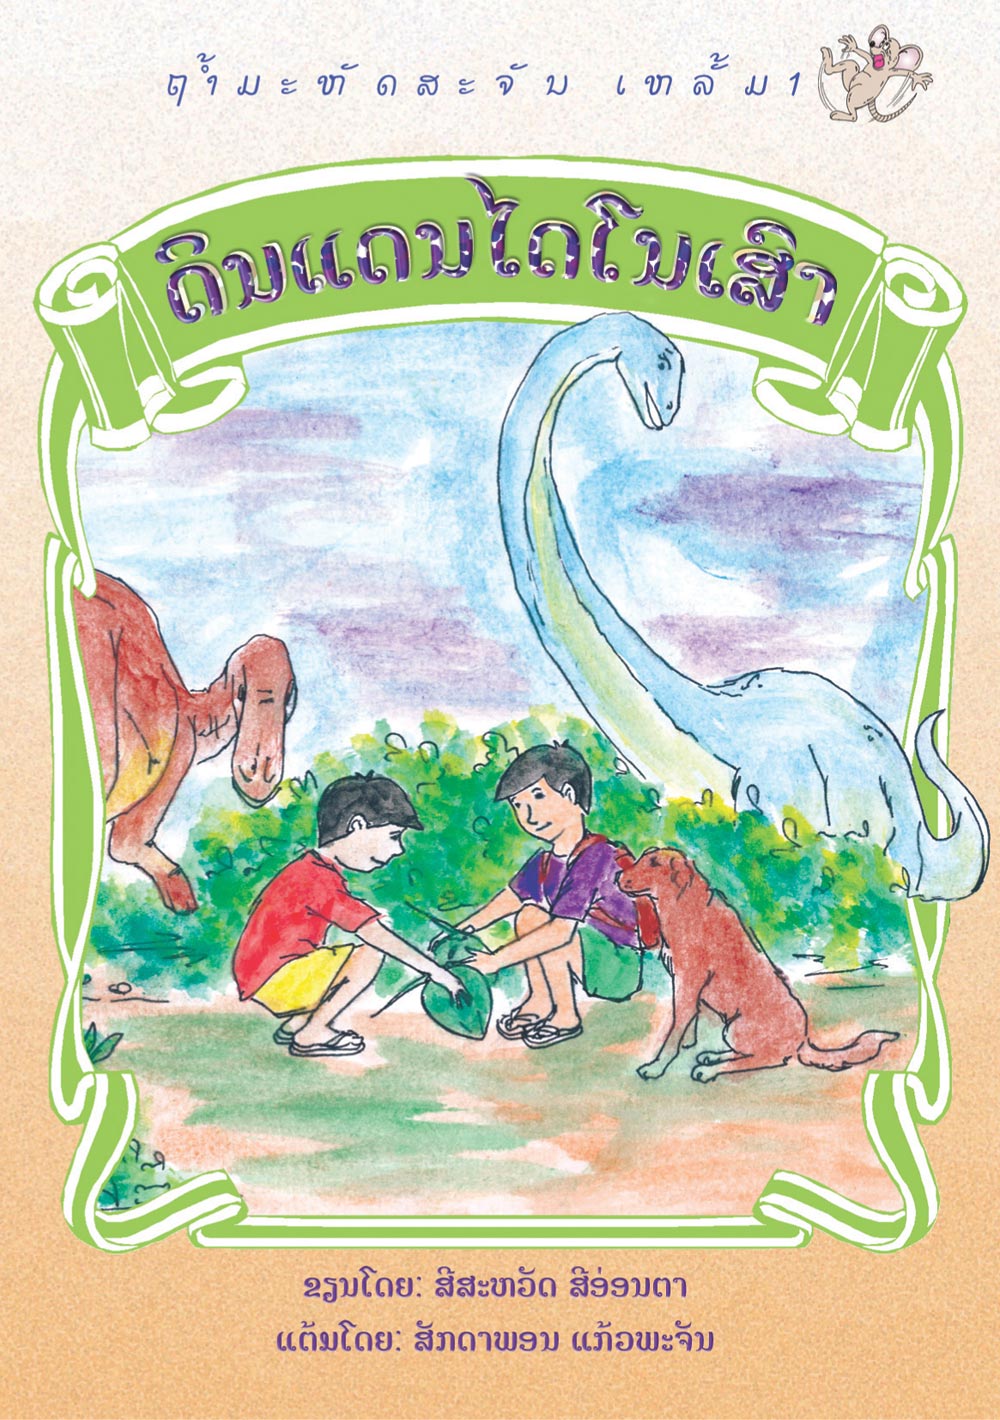 In the Land of Dinosaurs large book cover, published in Lao language